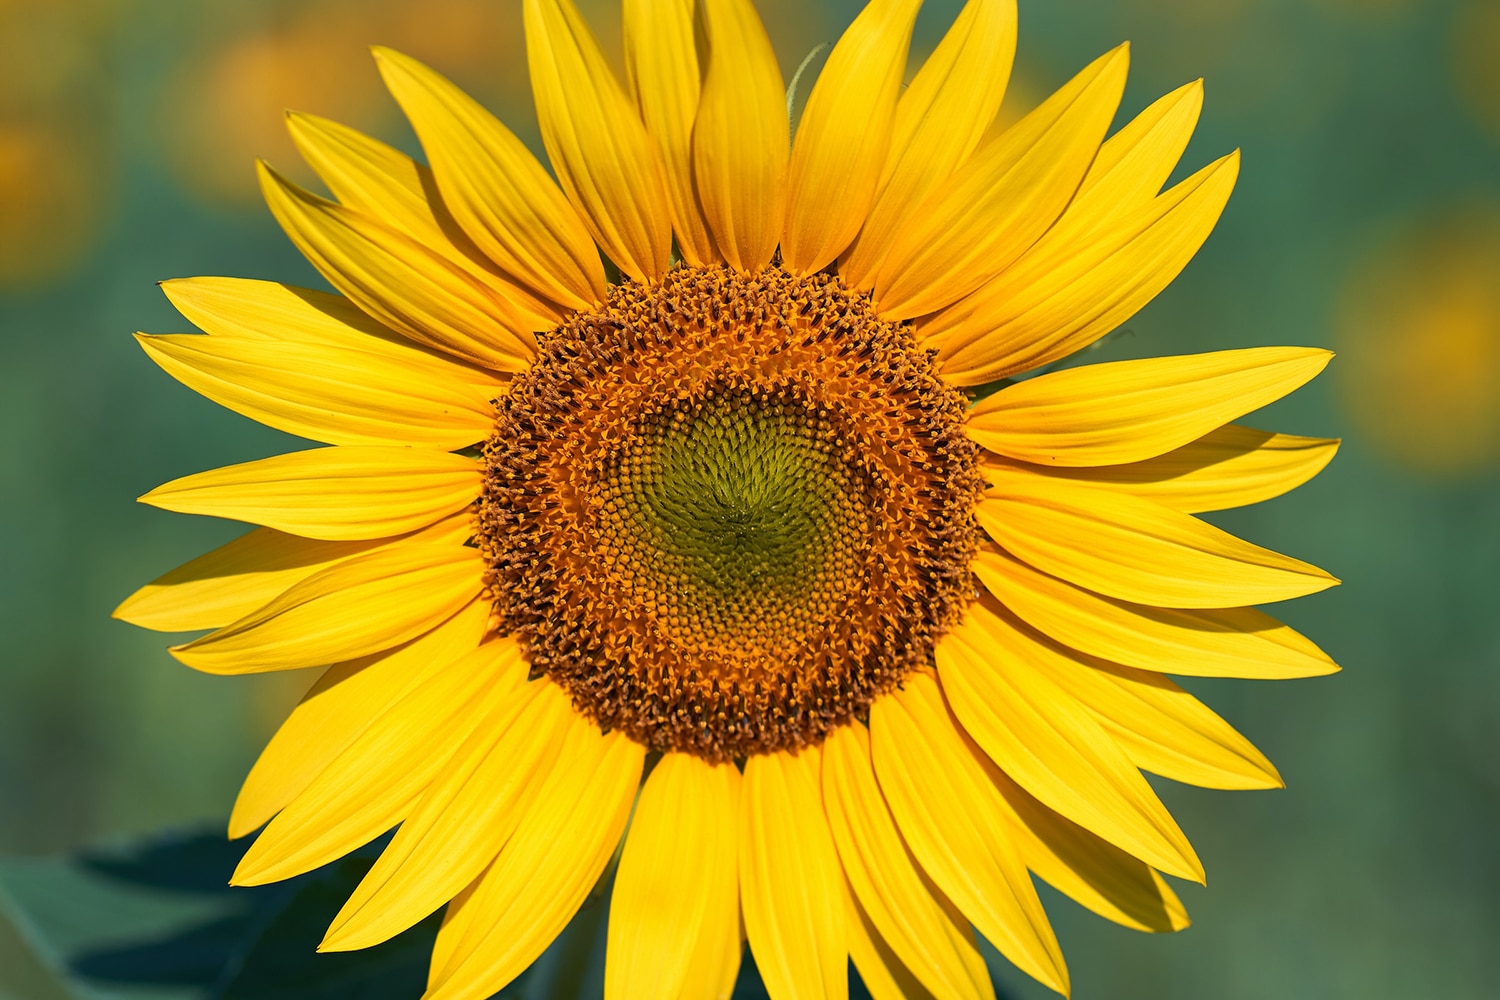 horizontal photo of a single sunflower in selective focus, with a very blurred sunflower field in the background